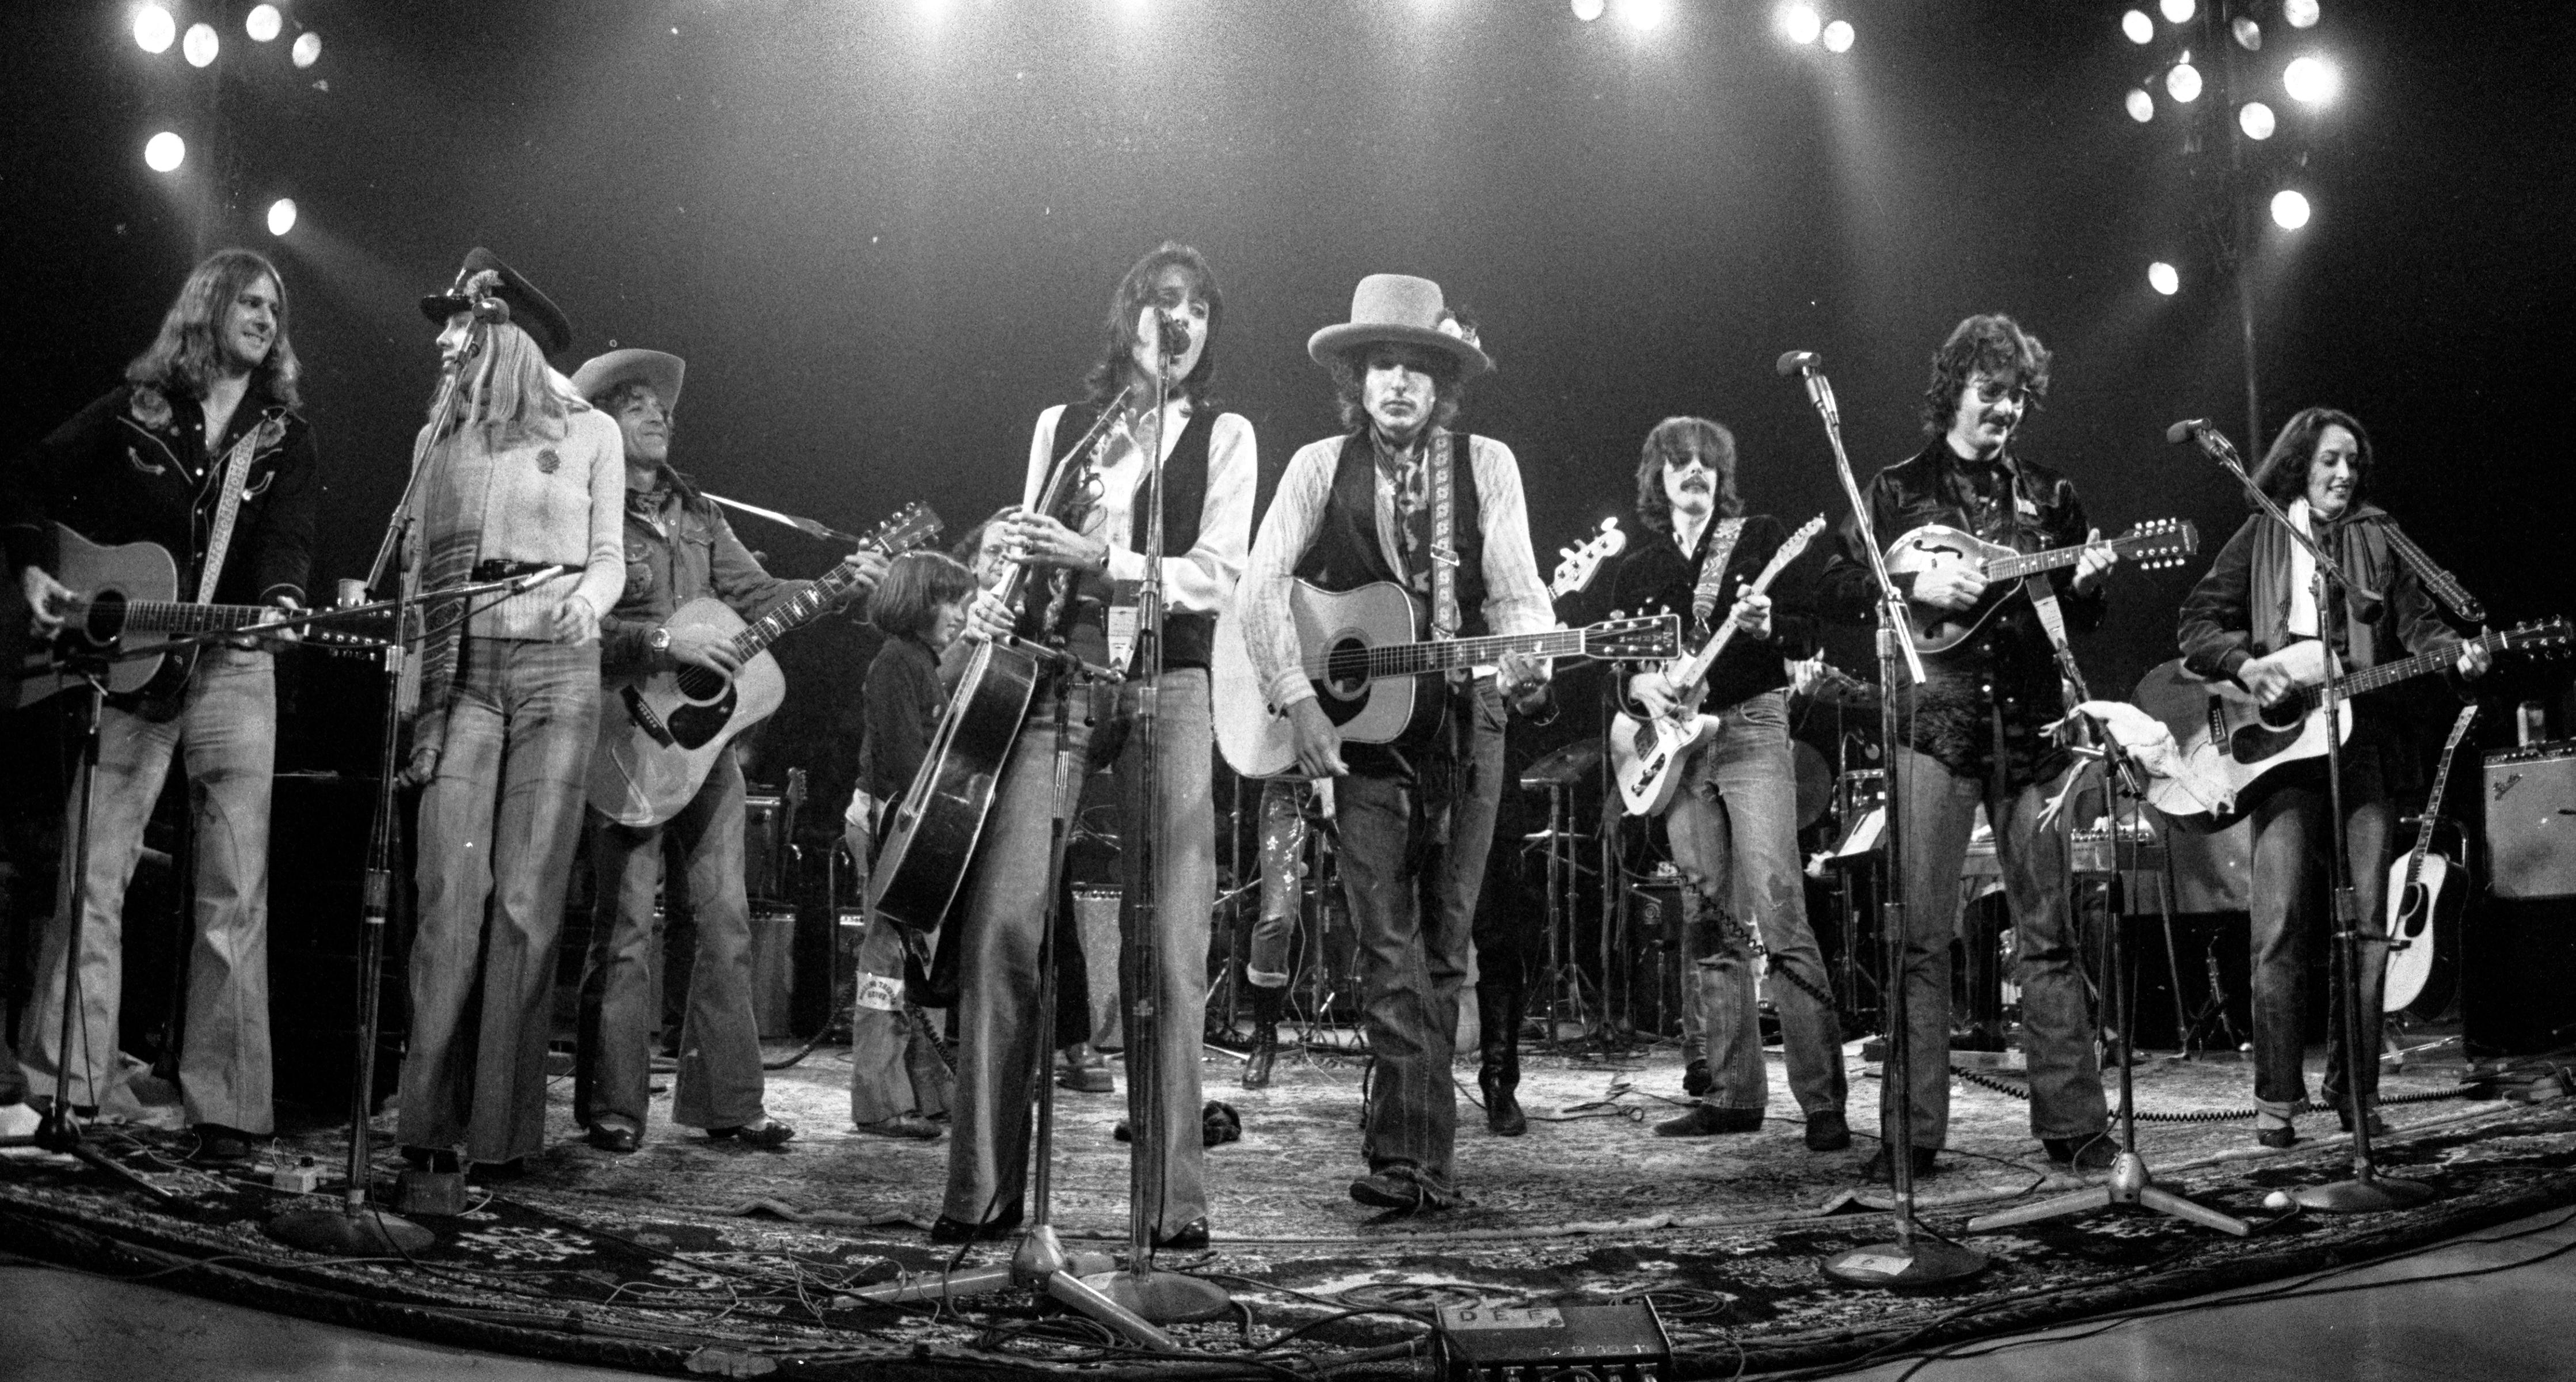 Ken Regan Black and White Photograph - Bob Dylan, Joan Baez and the Band on stage, Rolling Thunder Revue Tour, Montreal